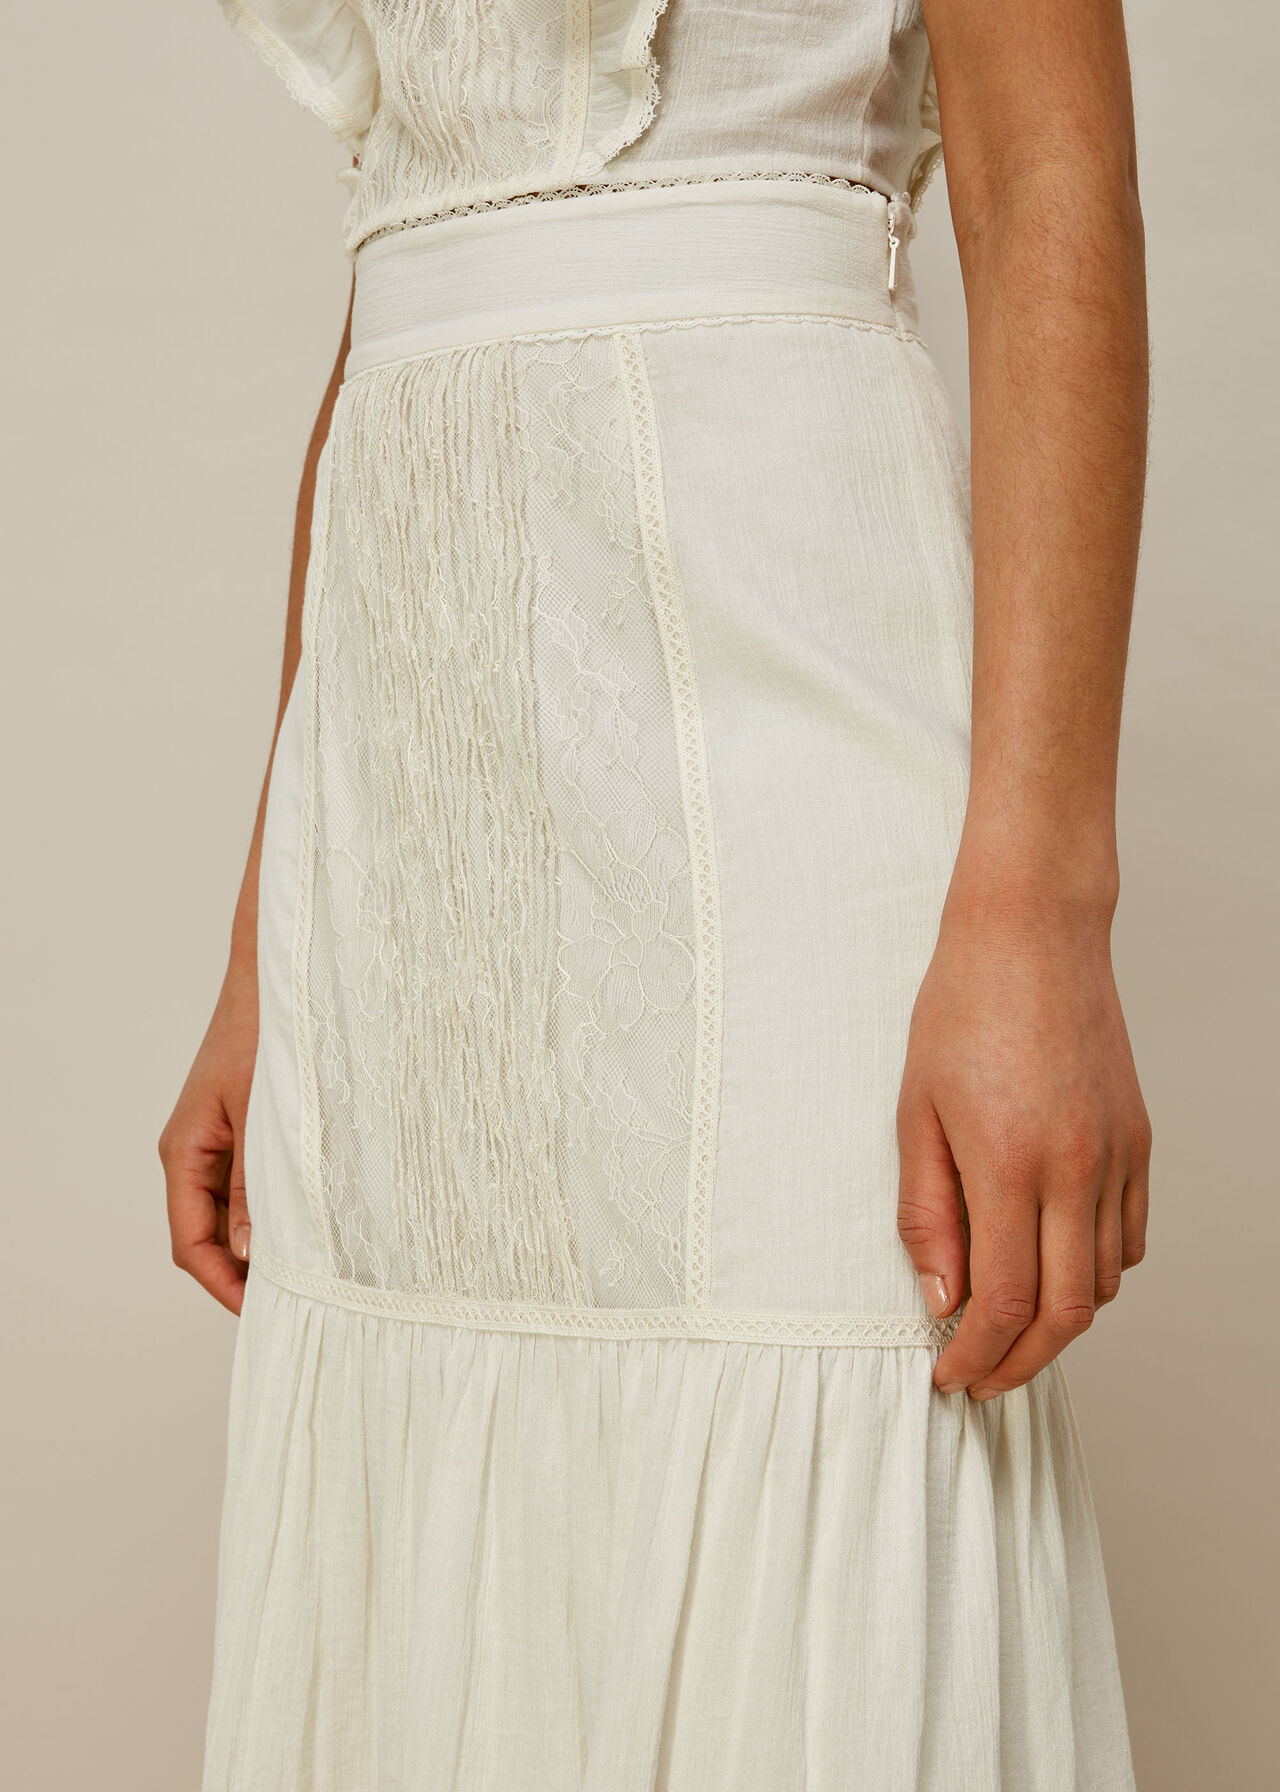 Ivory Mixed Lace Frill Skirt | WHISTLES